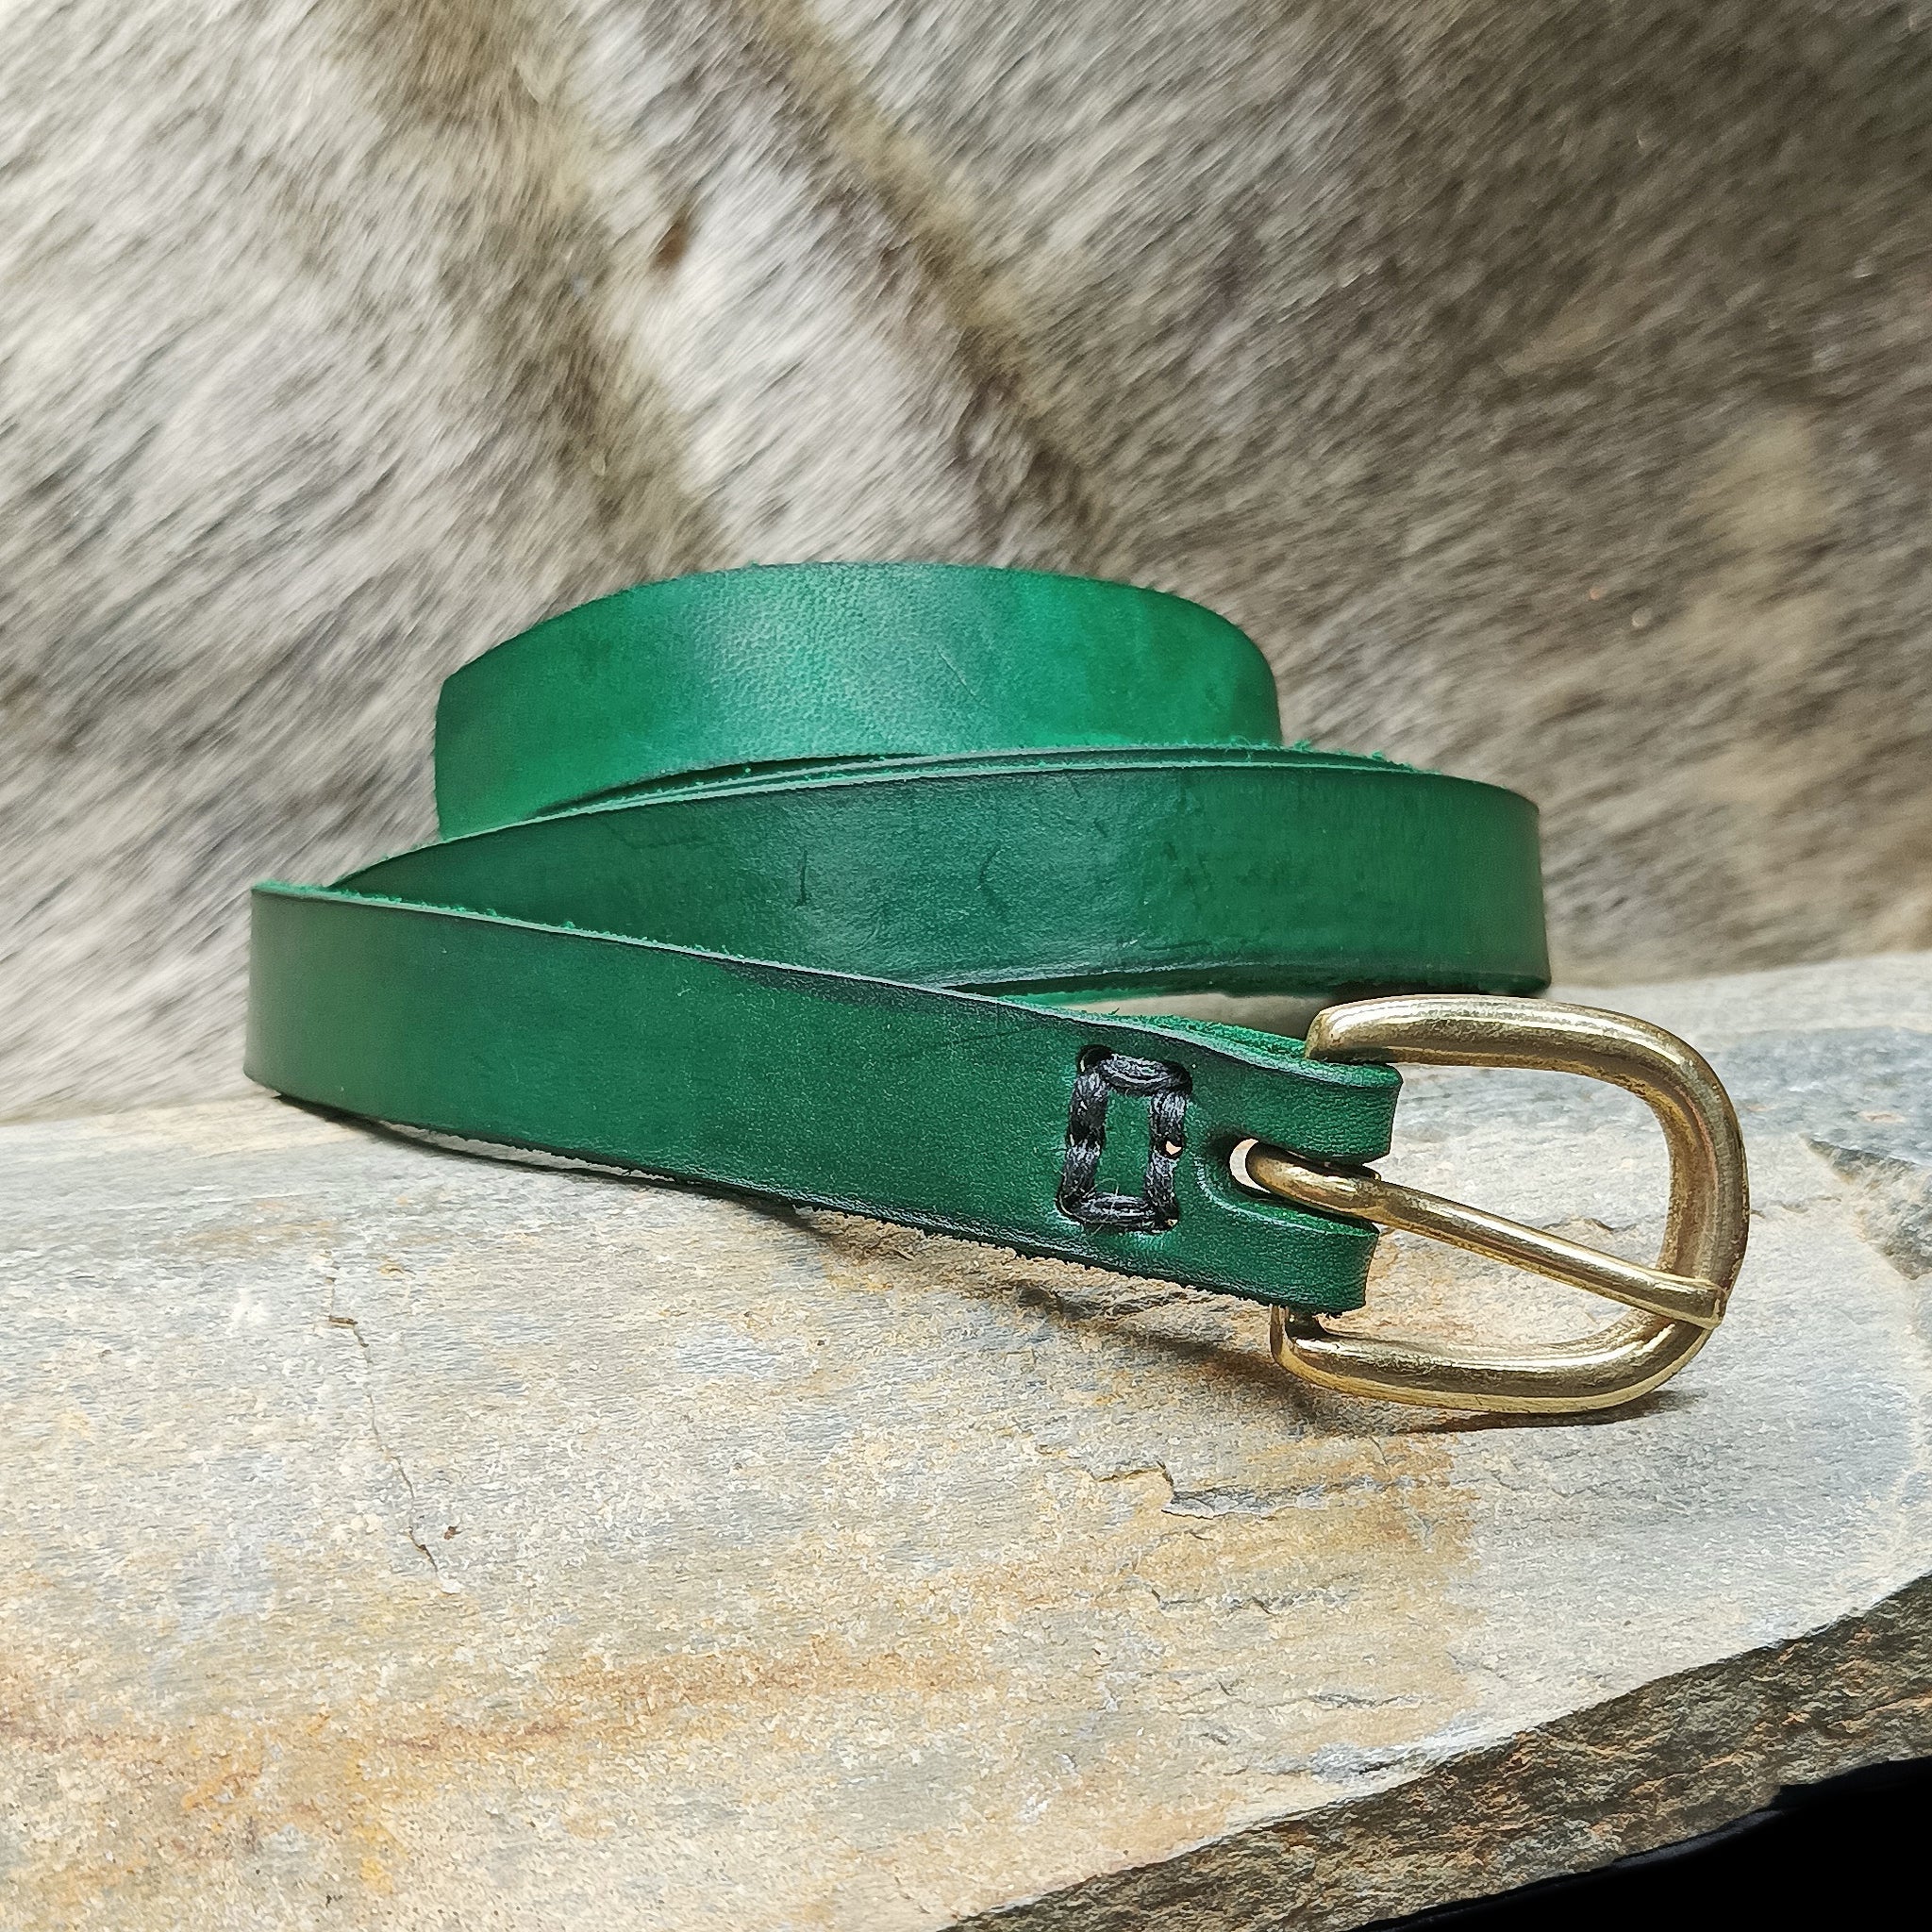 Standard Leather Baldric with Brass Buckle - Green with Black Linen Thread